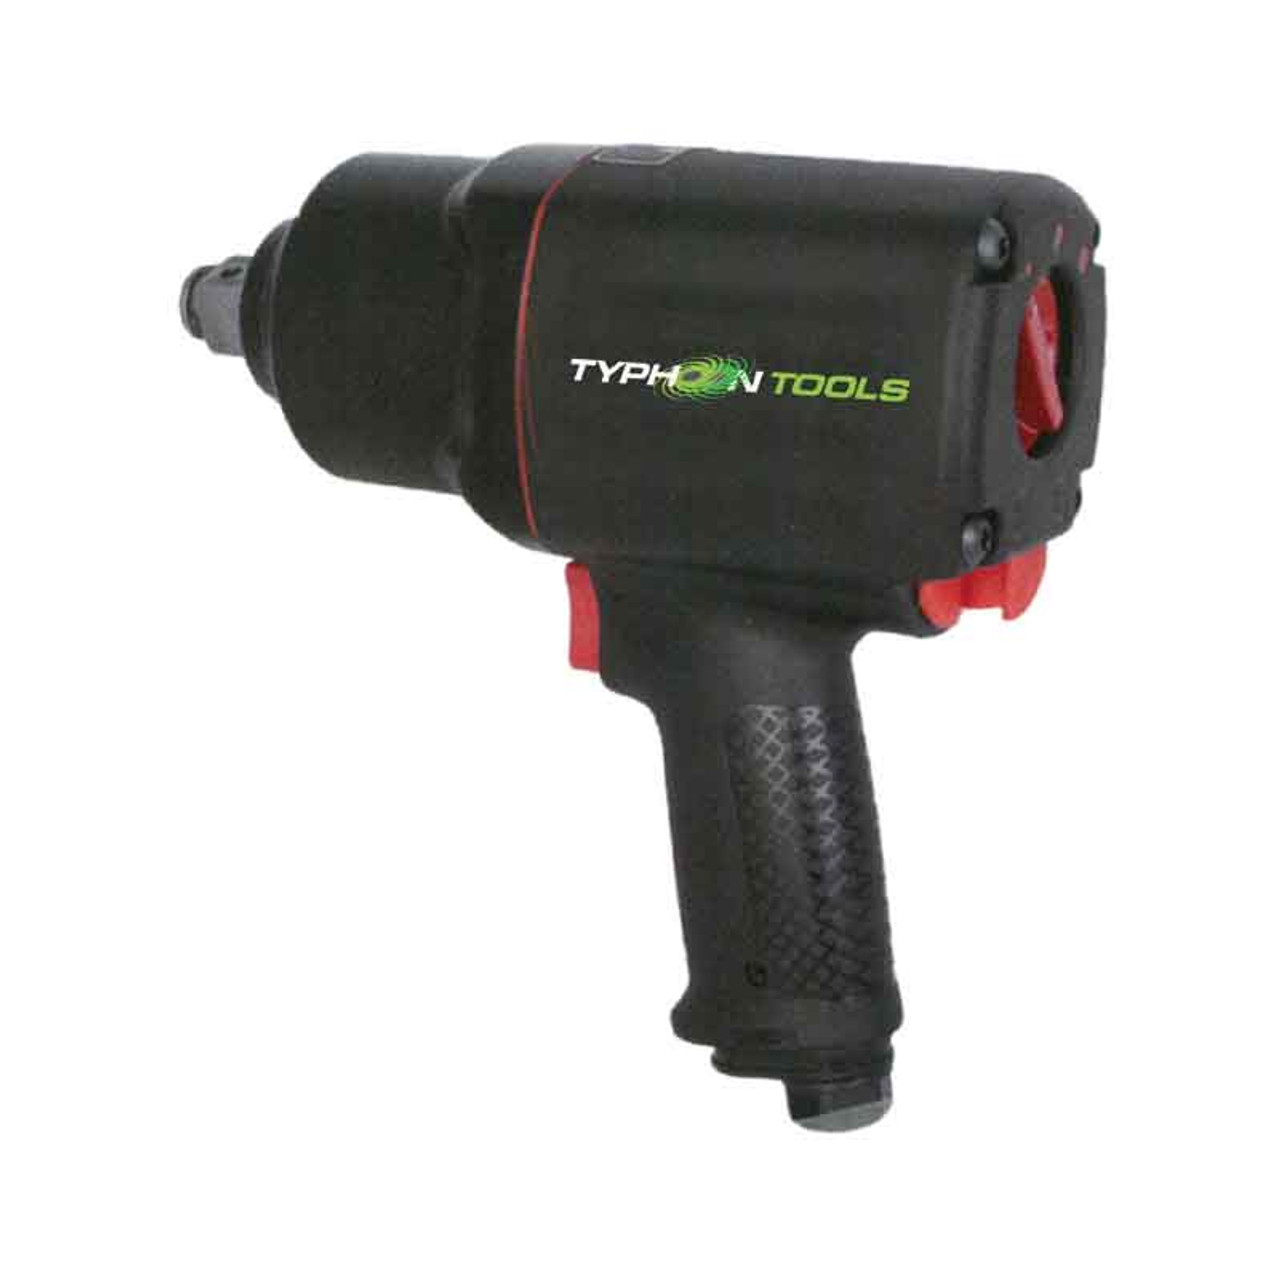 3/4" Composite Impact Wrench 1500Ft Lbs